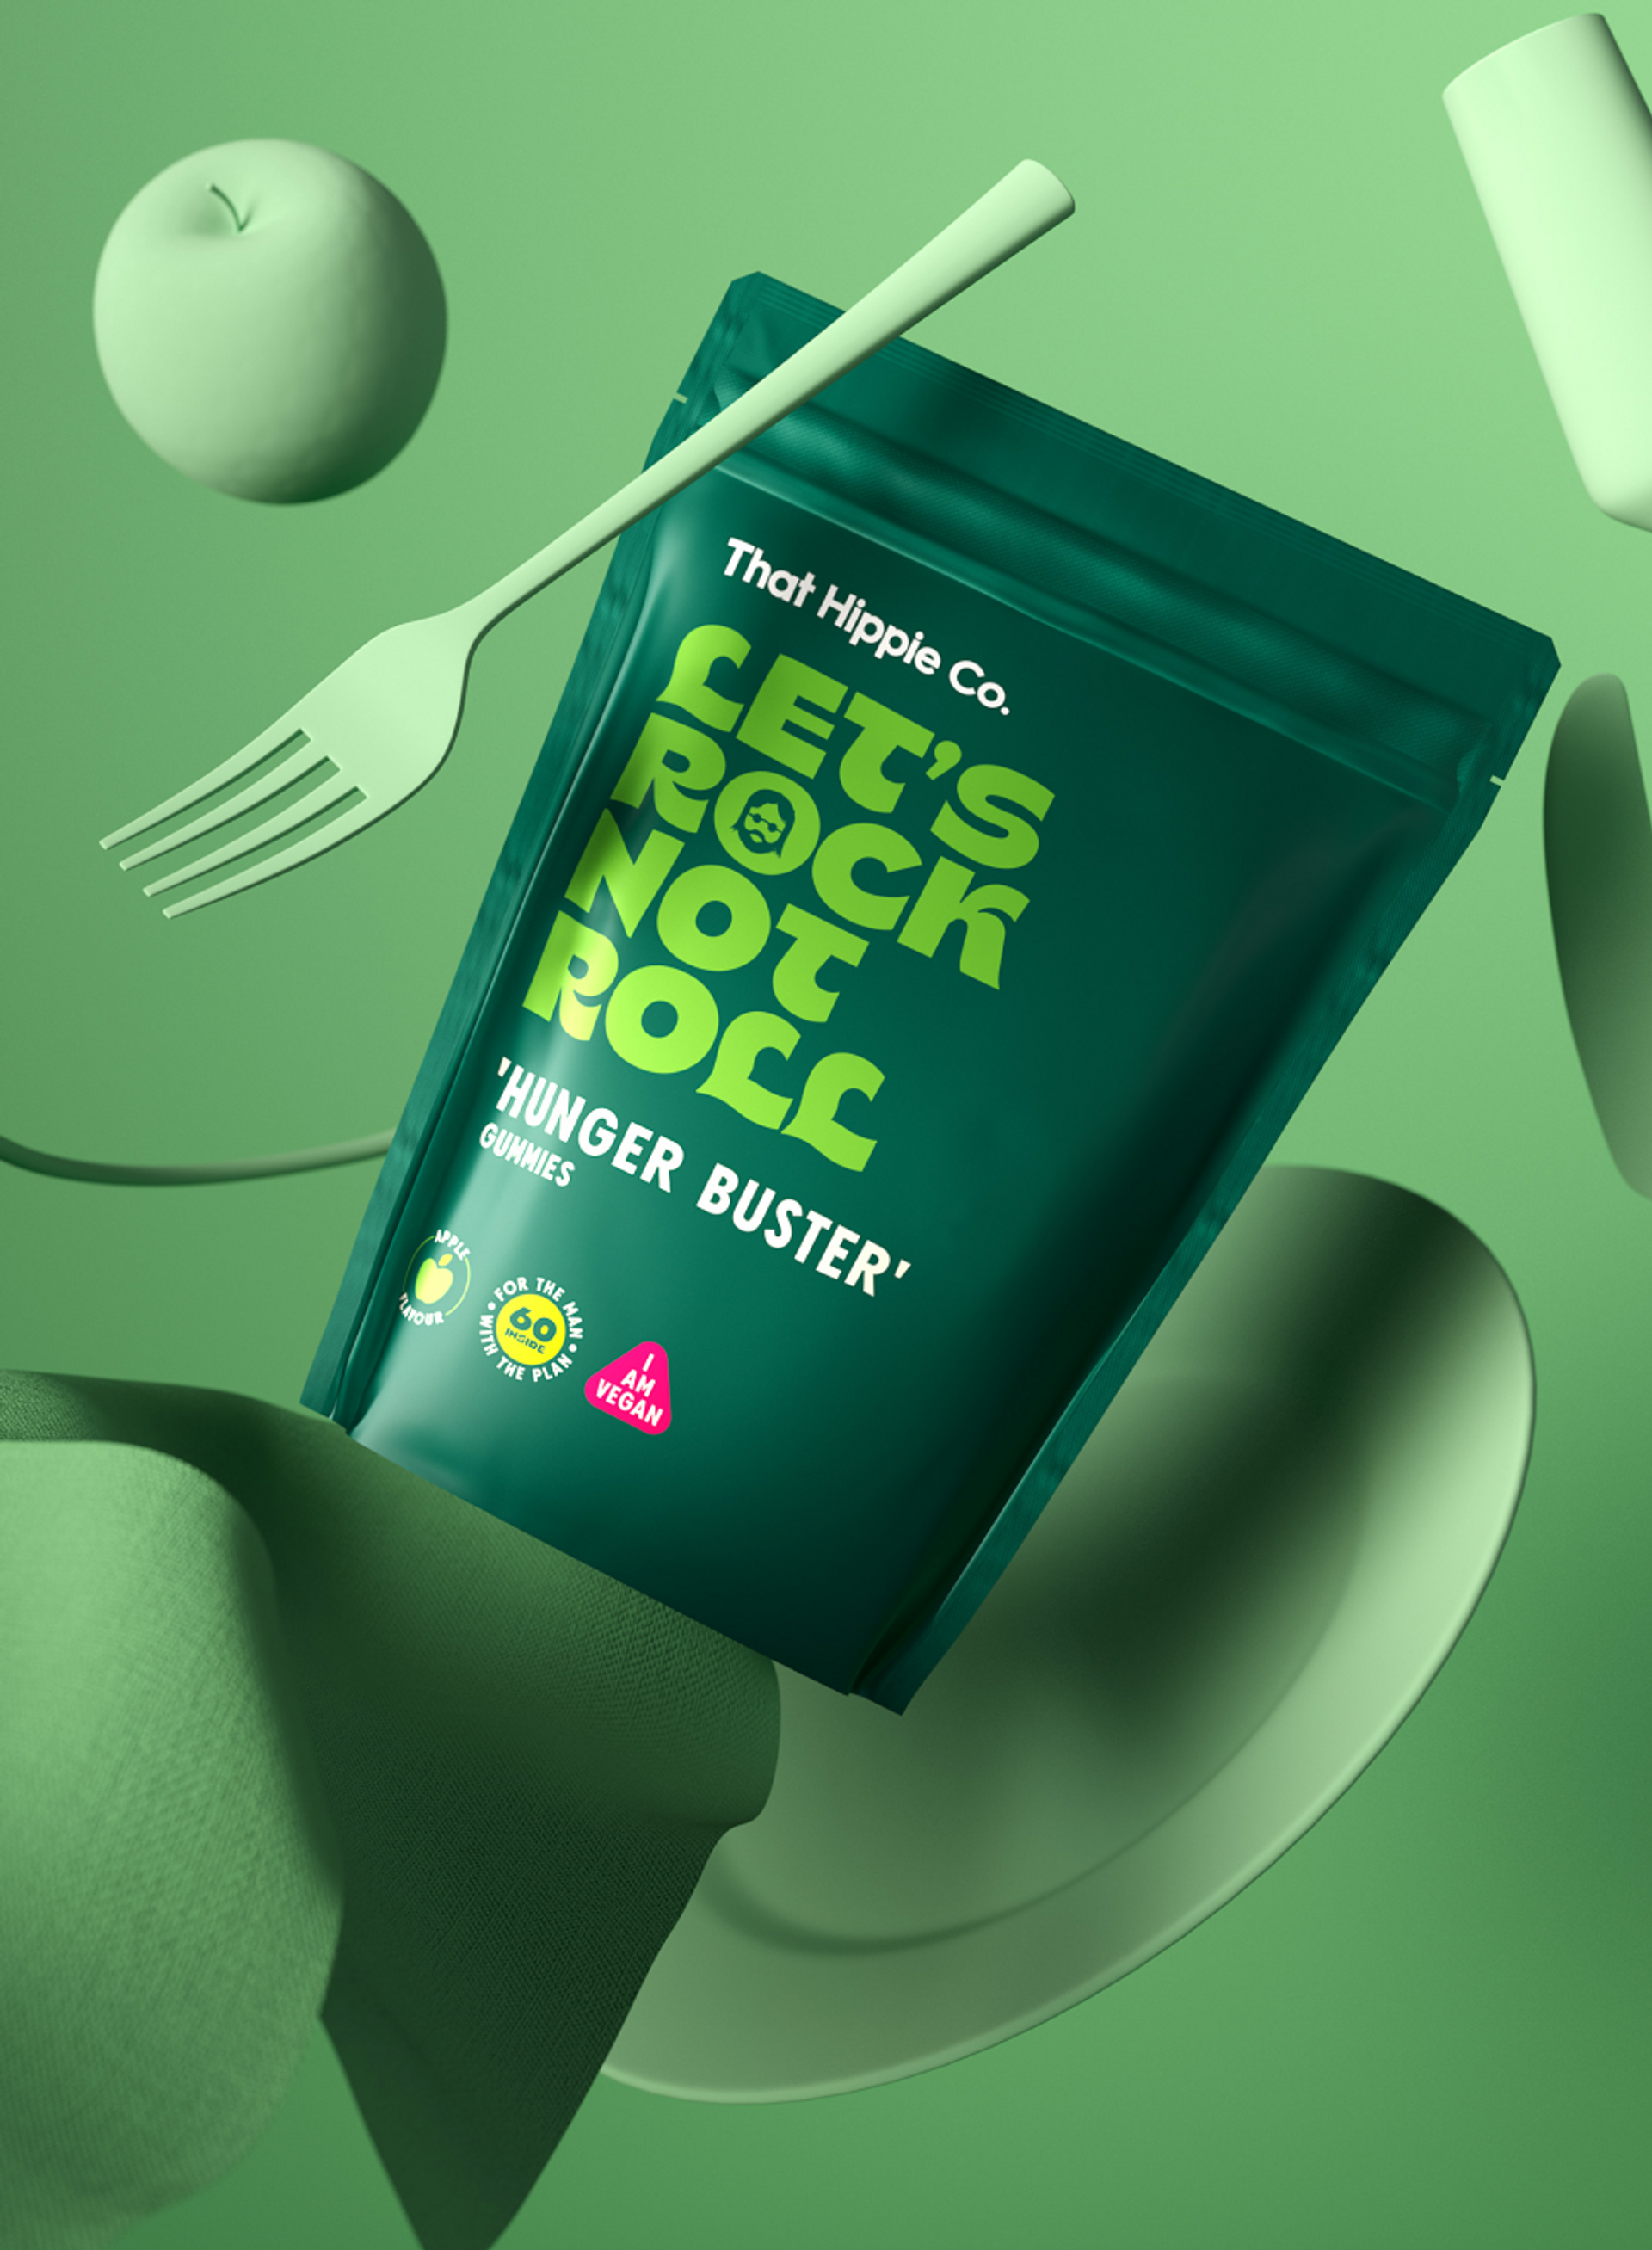 Floating gummies packaging design by Our Revolution for That Hippie Co supplement brand with pastel green eating accessories for vegan “Hunger Buster” gummies featuring brand slogan “Let’s rock not roll”